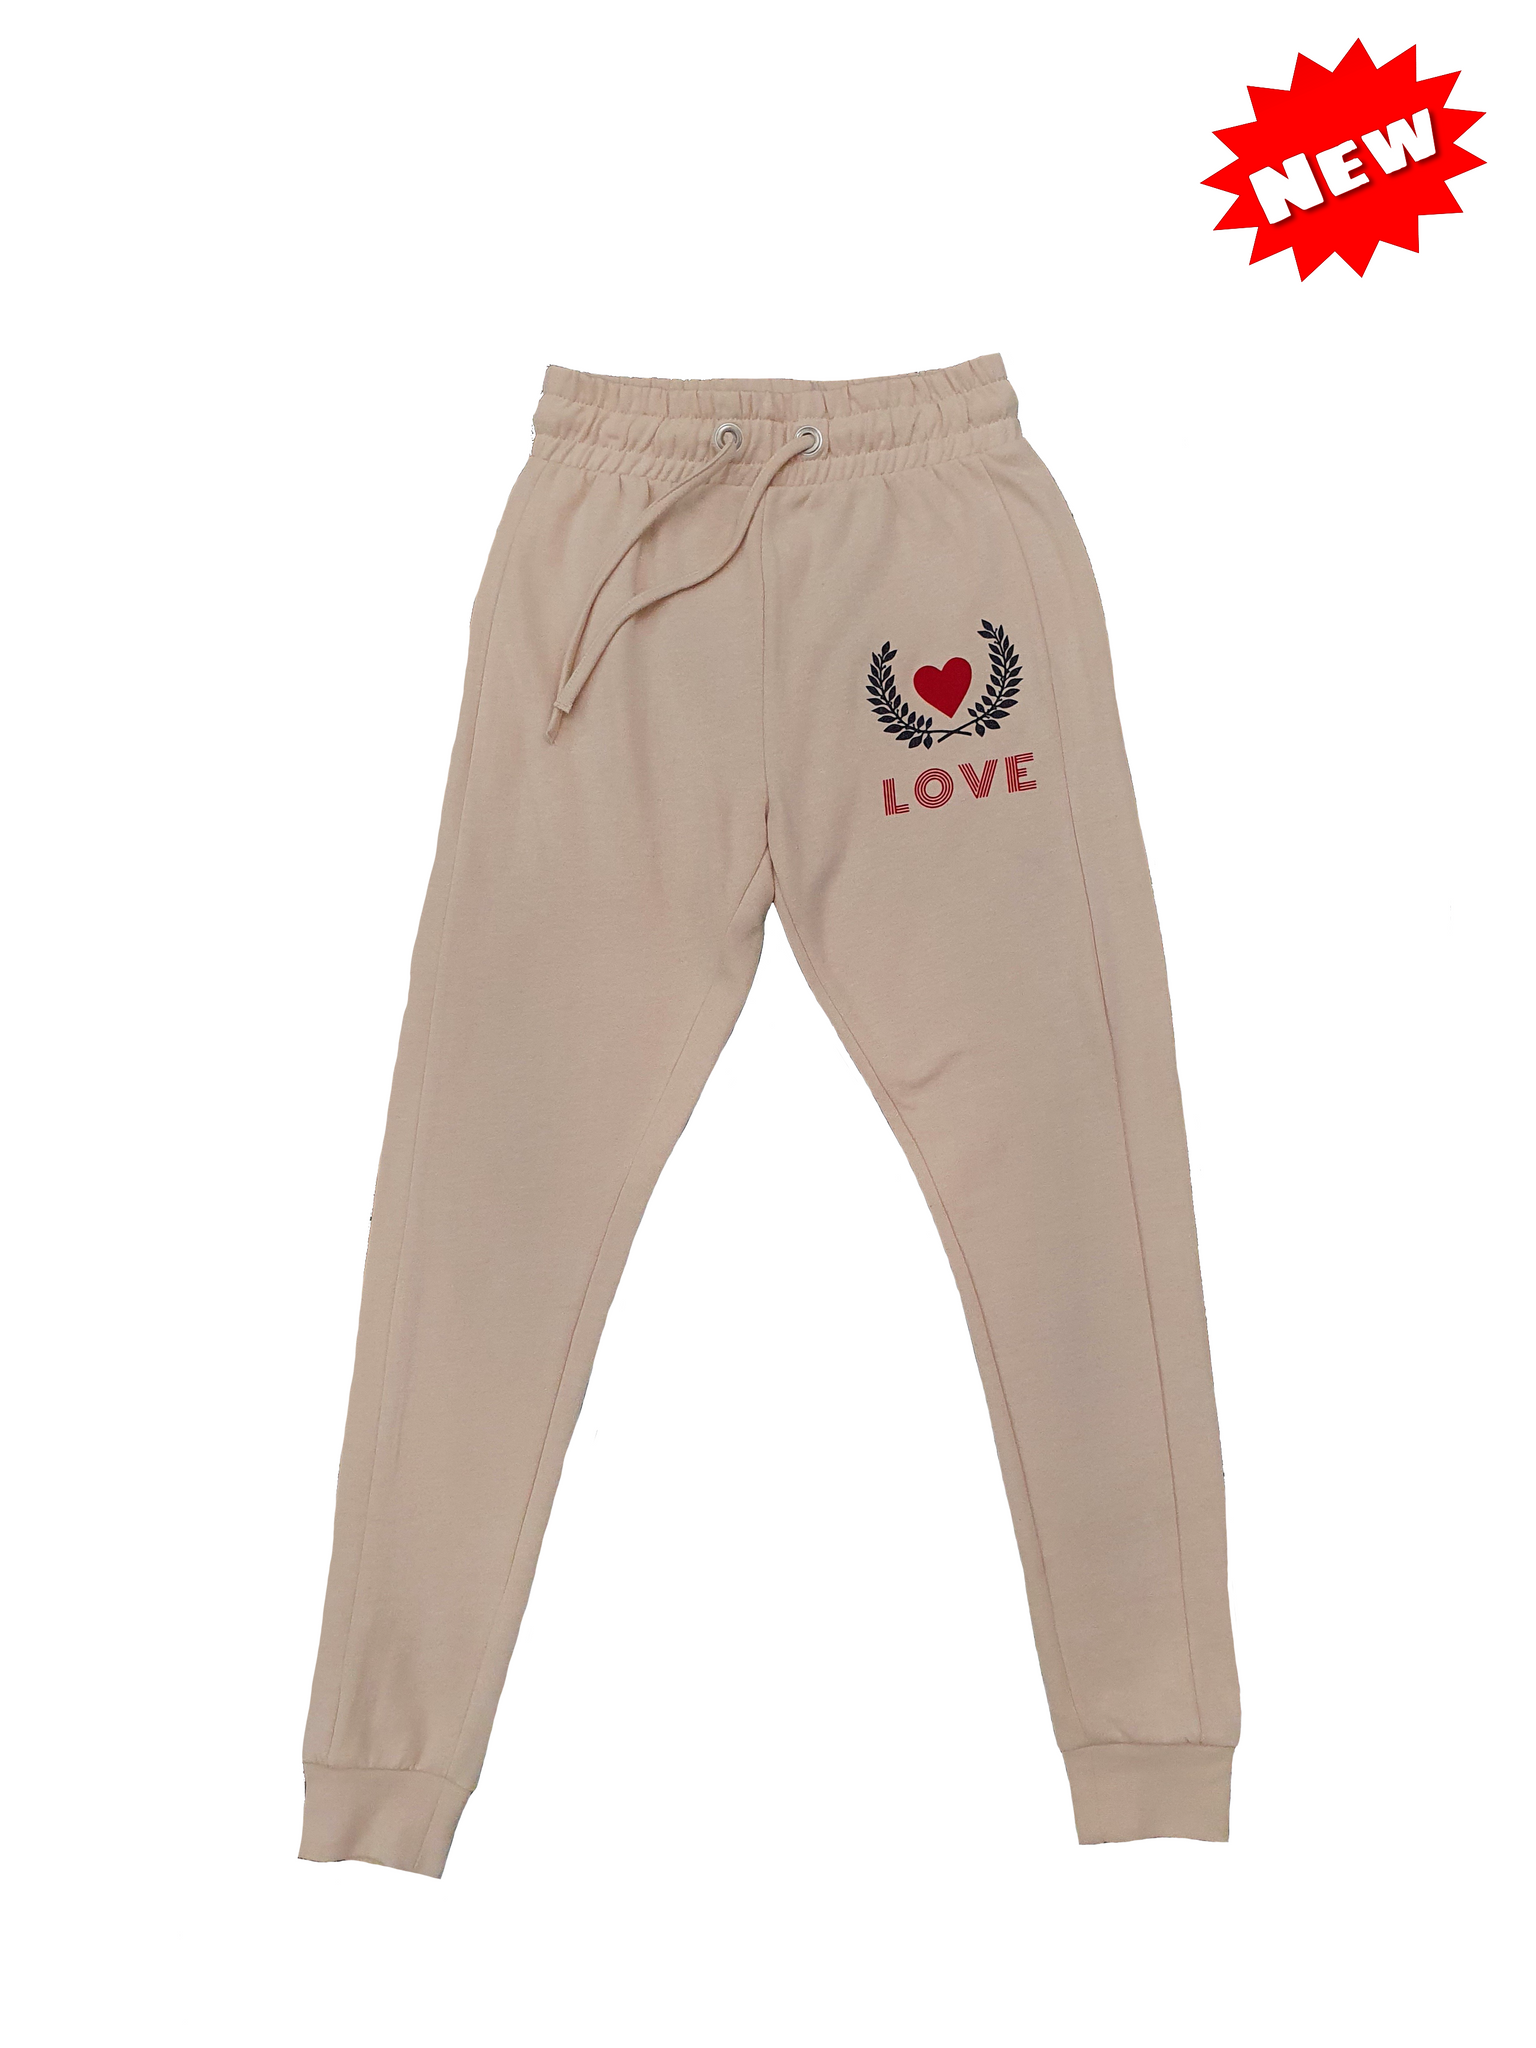 Co ord Love Graphics Print Joggers - Nude